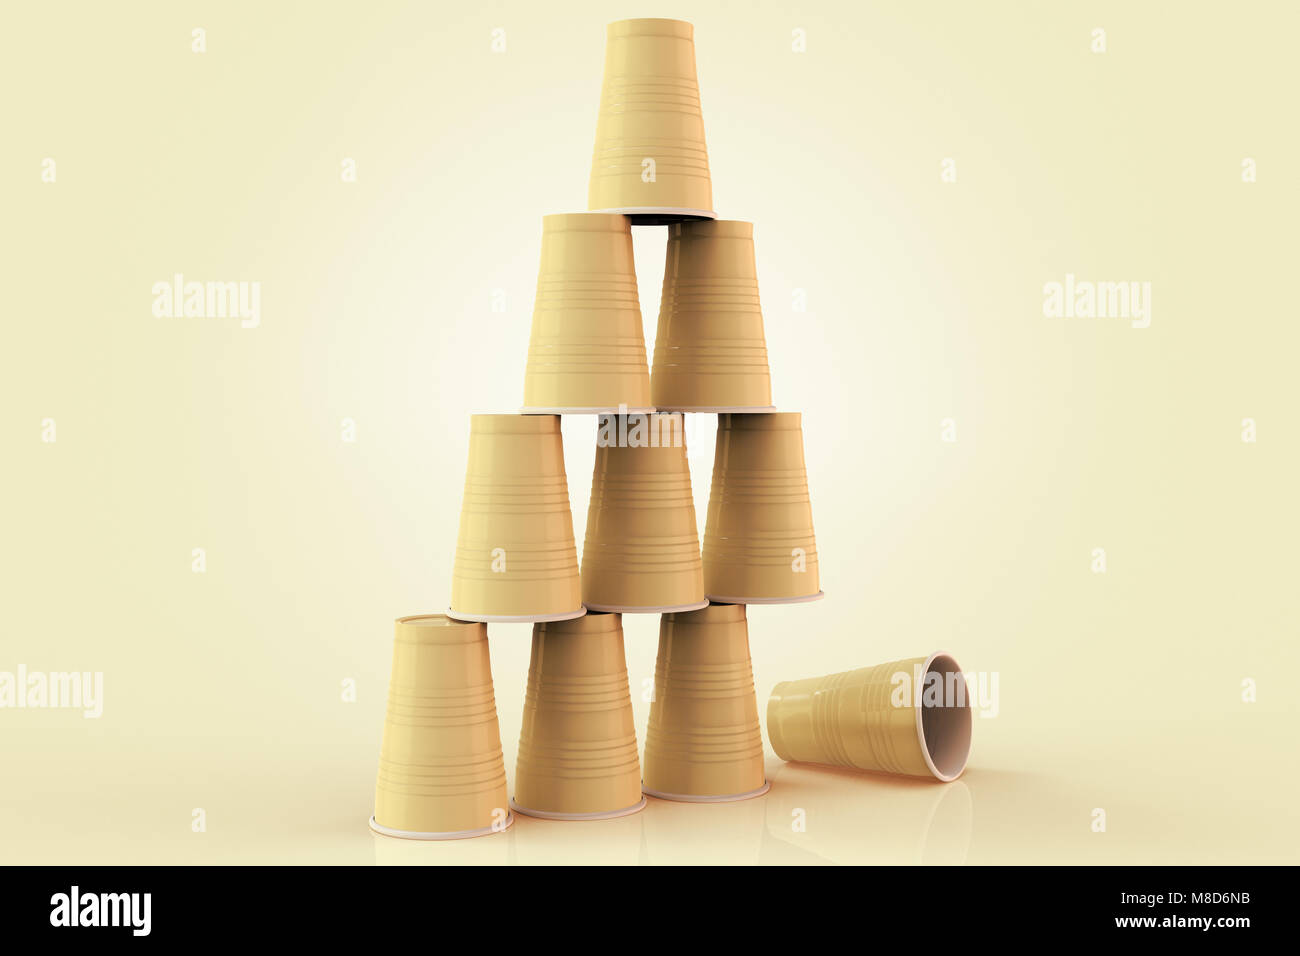 https://c8.alamy.com/comp/M8D6NB/3d-rendering-of-plastic-cups-stacked-in-a-pyramid-with-one-fallen-M8D6NB.jpg